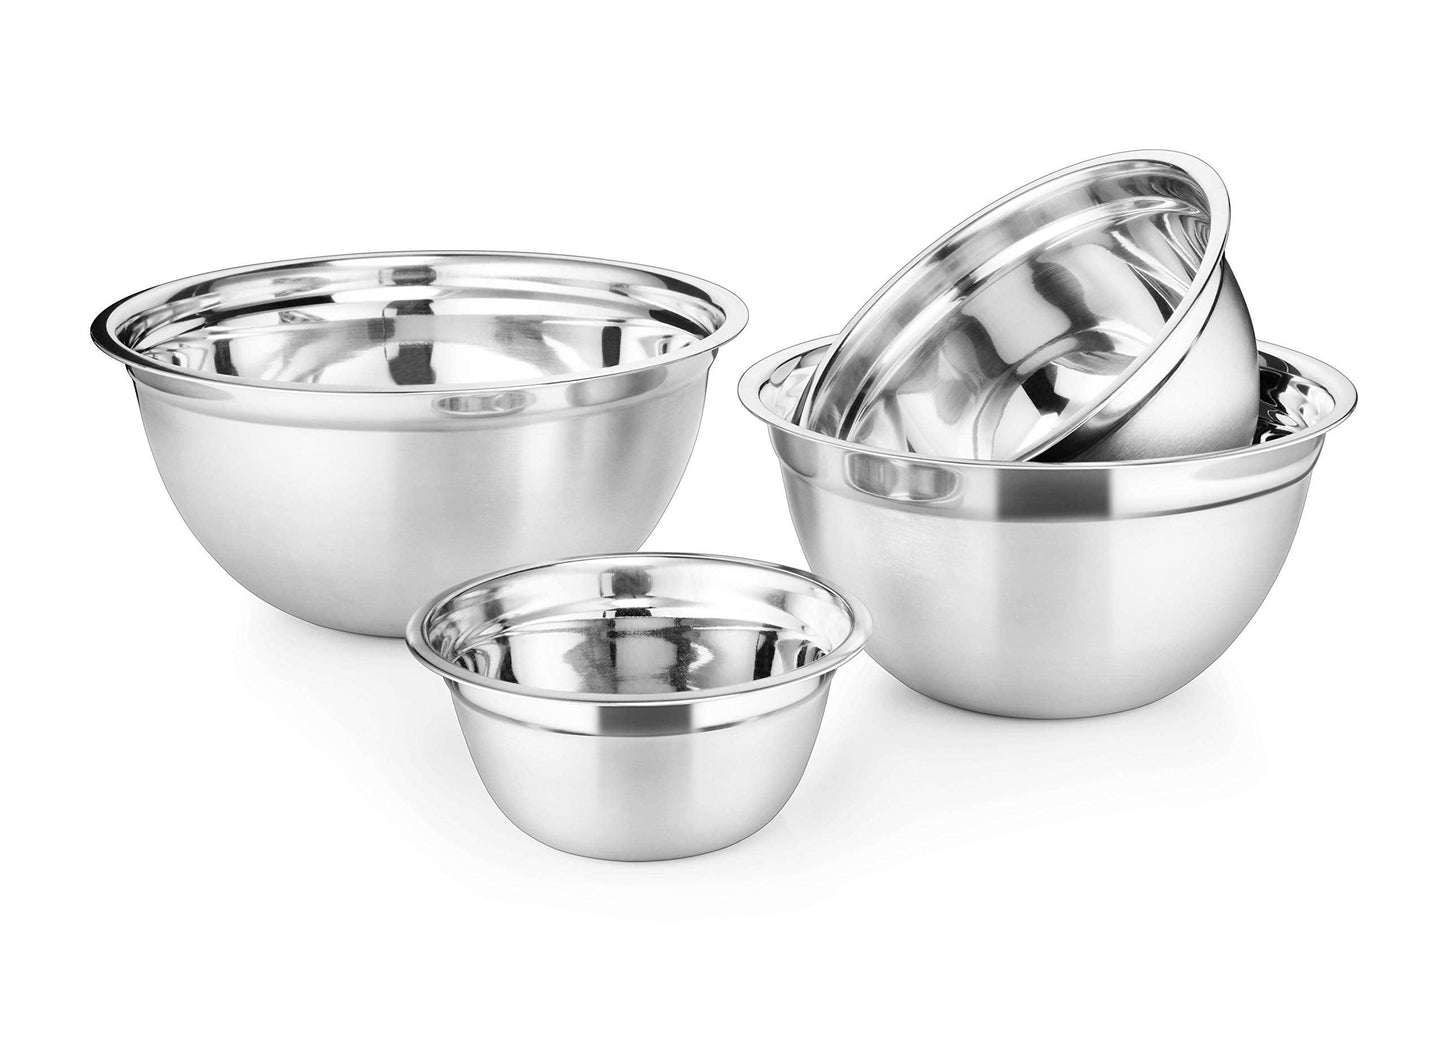 Avador Premium Stainless Steel German Mixing Bowls, Set of 4 Brushed Stainless Steel Mixing Bowl Set, Easy To Clean, Space Saving, Great for Cooking, Baking, Prepping - CookCave